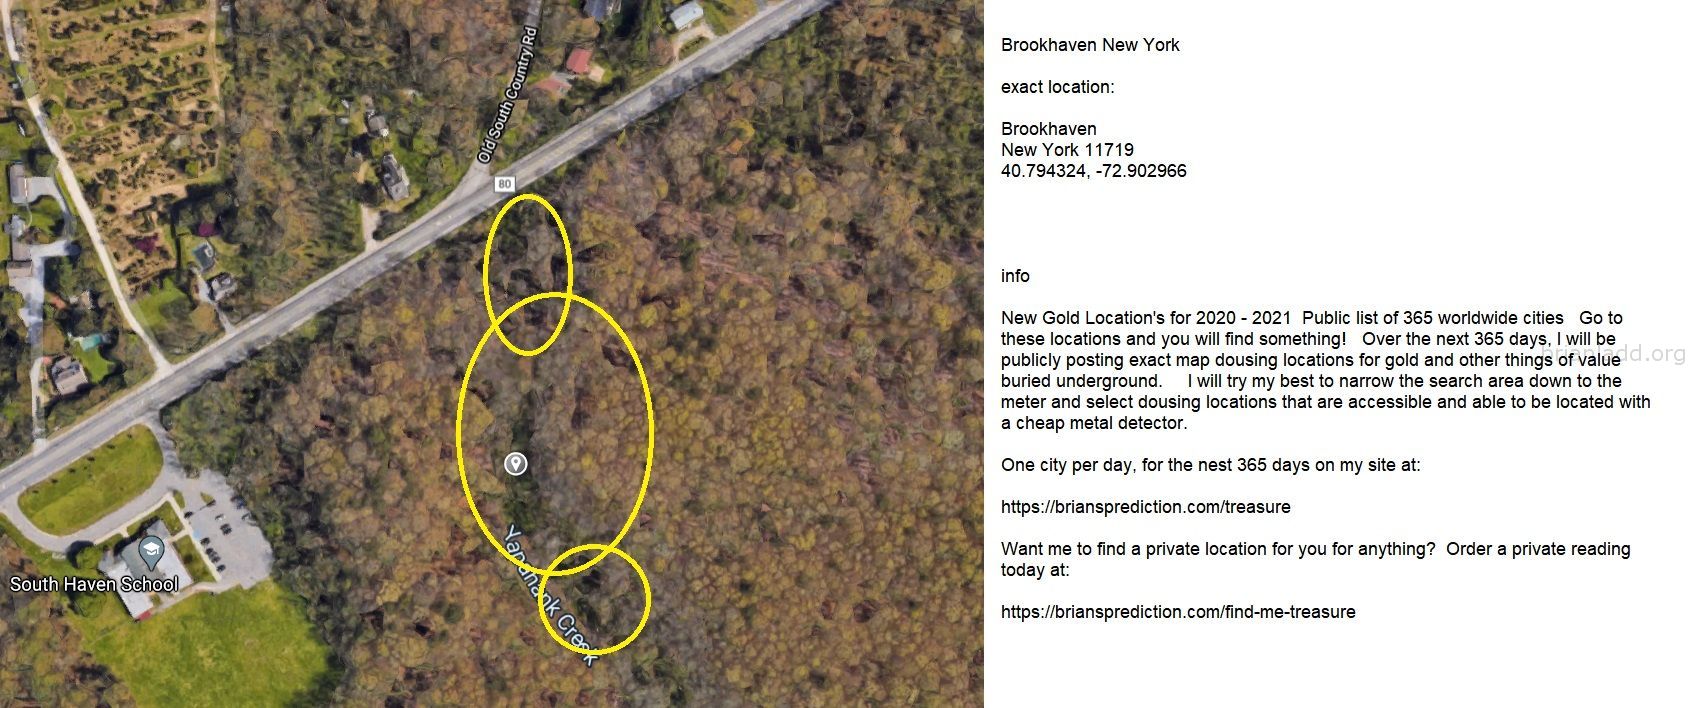 Brookhaven New York Gold Map 48 By Psychic Brian Ladd - Brookhaven New York Gold Map 48 By Psychic Brian Ladd  Exact Loc...
Brookhaven New York Gold Map 48 By Psychic Brian Ladd  Exact Location:  Brookhaven  New York 11719  40.794324, -72.902966  Info  New Gold Location'S For 2020 - 2021  Public List Of 365 Worldwide Cities  Go To These Locations And You Will Find Something!  Over The Next 365 Days, I Will Be Publicly Posting Exact Map Dousing Locations For Gold And Other Things Of Value Buried Underground.  I Will Try My Best To Narrow The Search Area Down To The Meter And Select Dousing Locations That Are Accessible And Able To Be Located With A Cheap Metal Detector.  One City Per Day, For The Nest 365 Days On My Site At:   https://briansprediction.com/Treasure  Want Me To Find A Private Location For You For Anything?  Order A Private Reading Today At:   https://briansprediction.com/Find-Me-Treasure
